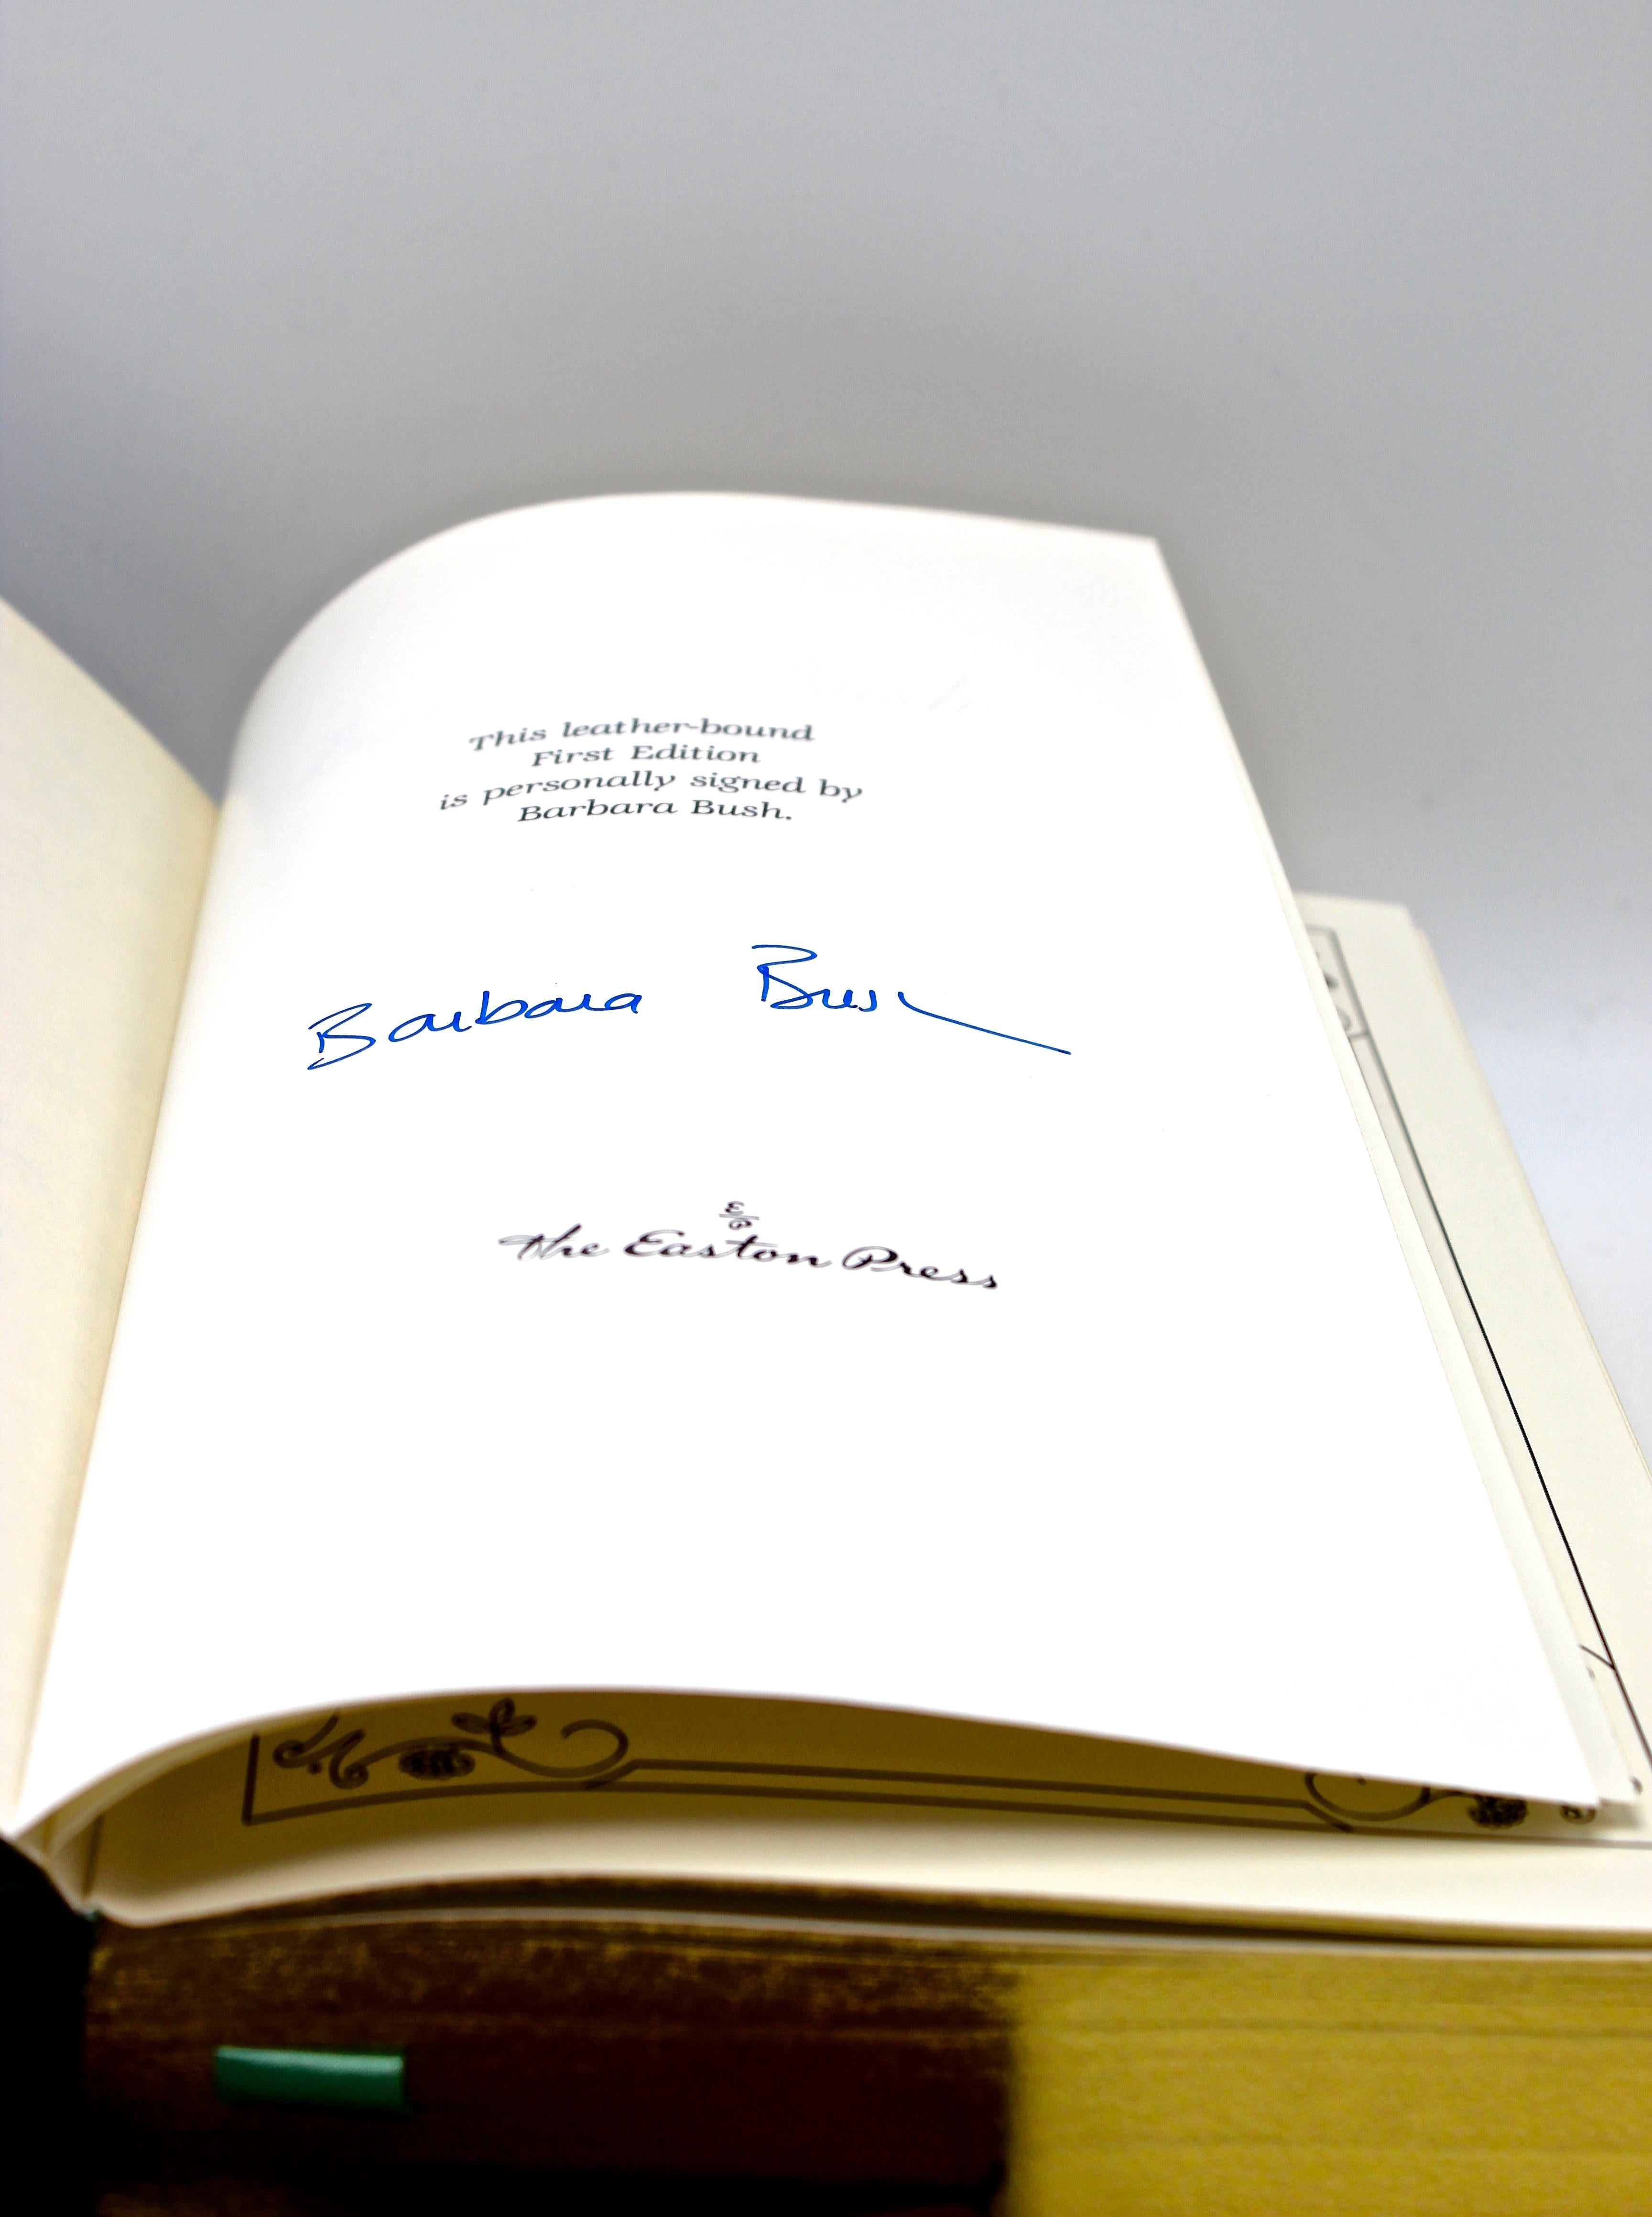 Bush, Barbara, Barbara Bush: A Memoir. Connecticut: Easton Press, 1994. First signed edition, bound in genuine leather.

Presented is Barbara Bush's memoir signed boldly by the author on the edition page. It is the first signed edition from Easton